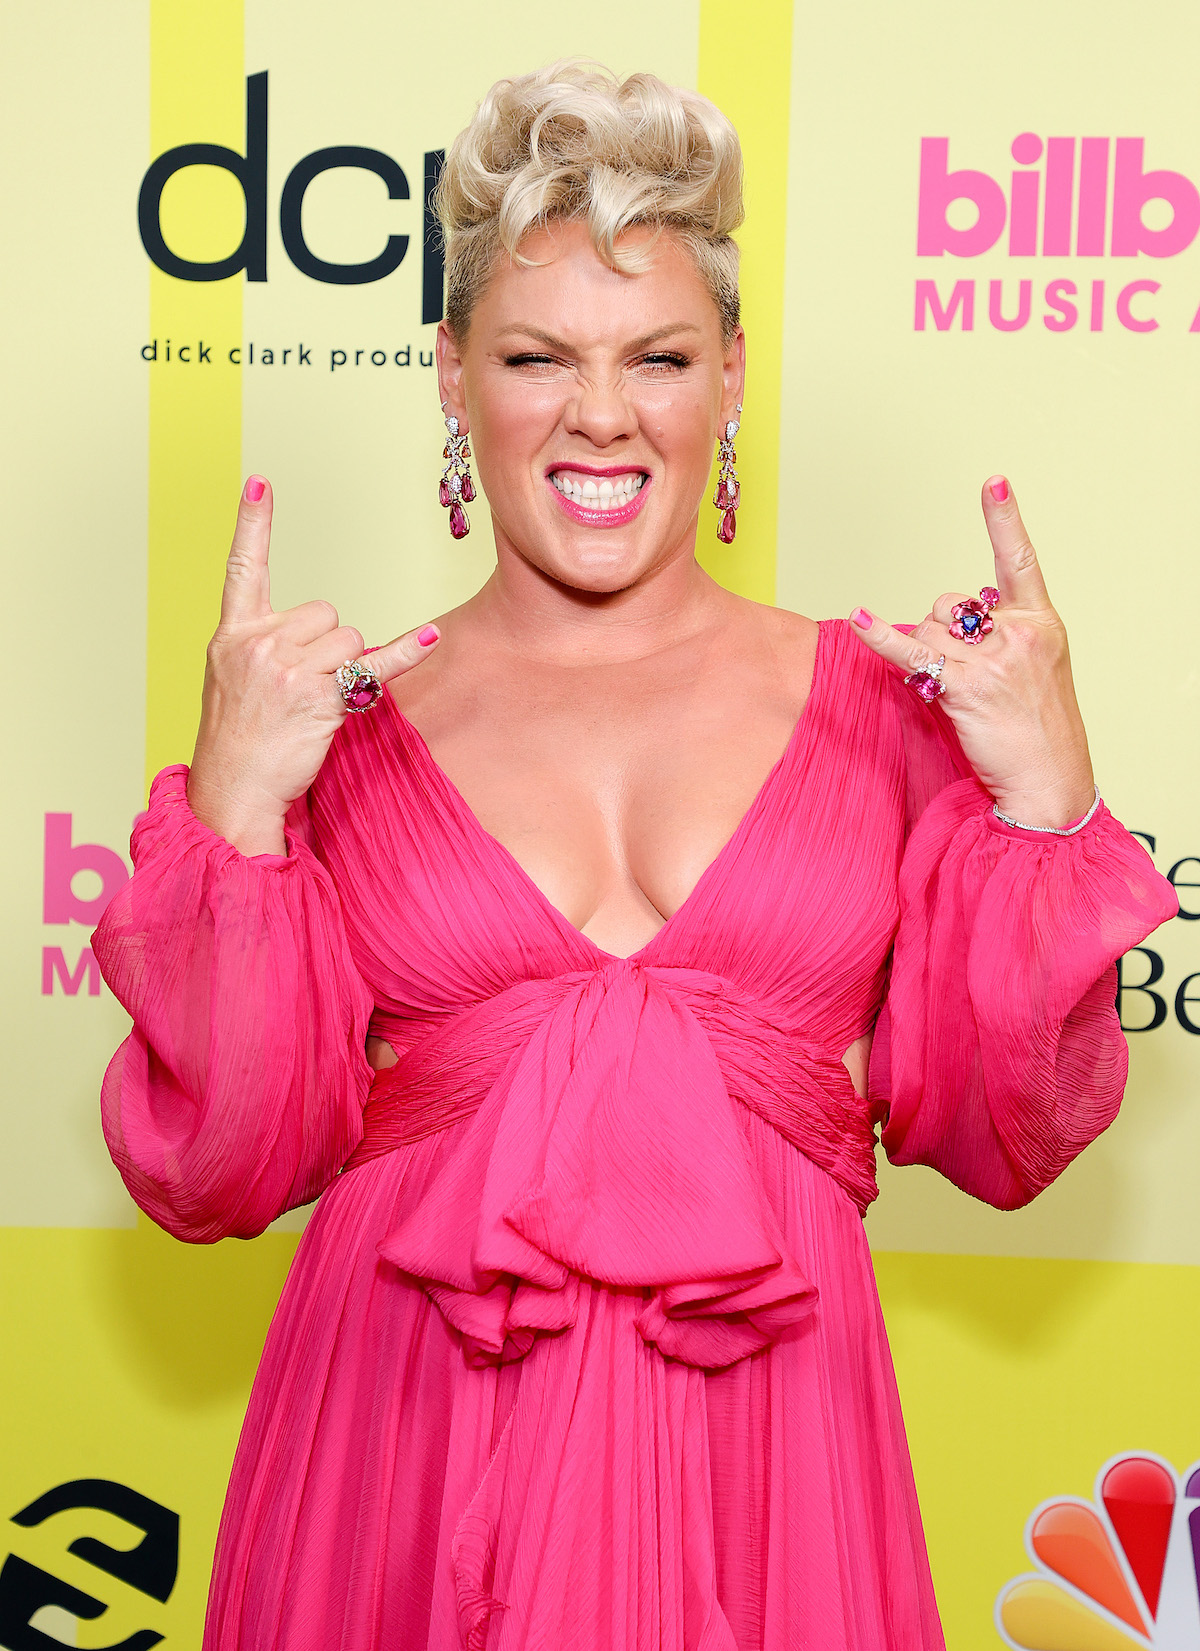 Pink wears a vibrant pink dress and short blonde hair, making rock signs with both hands and grimacing at the camera.